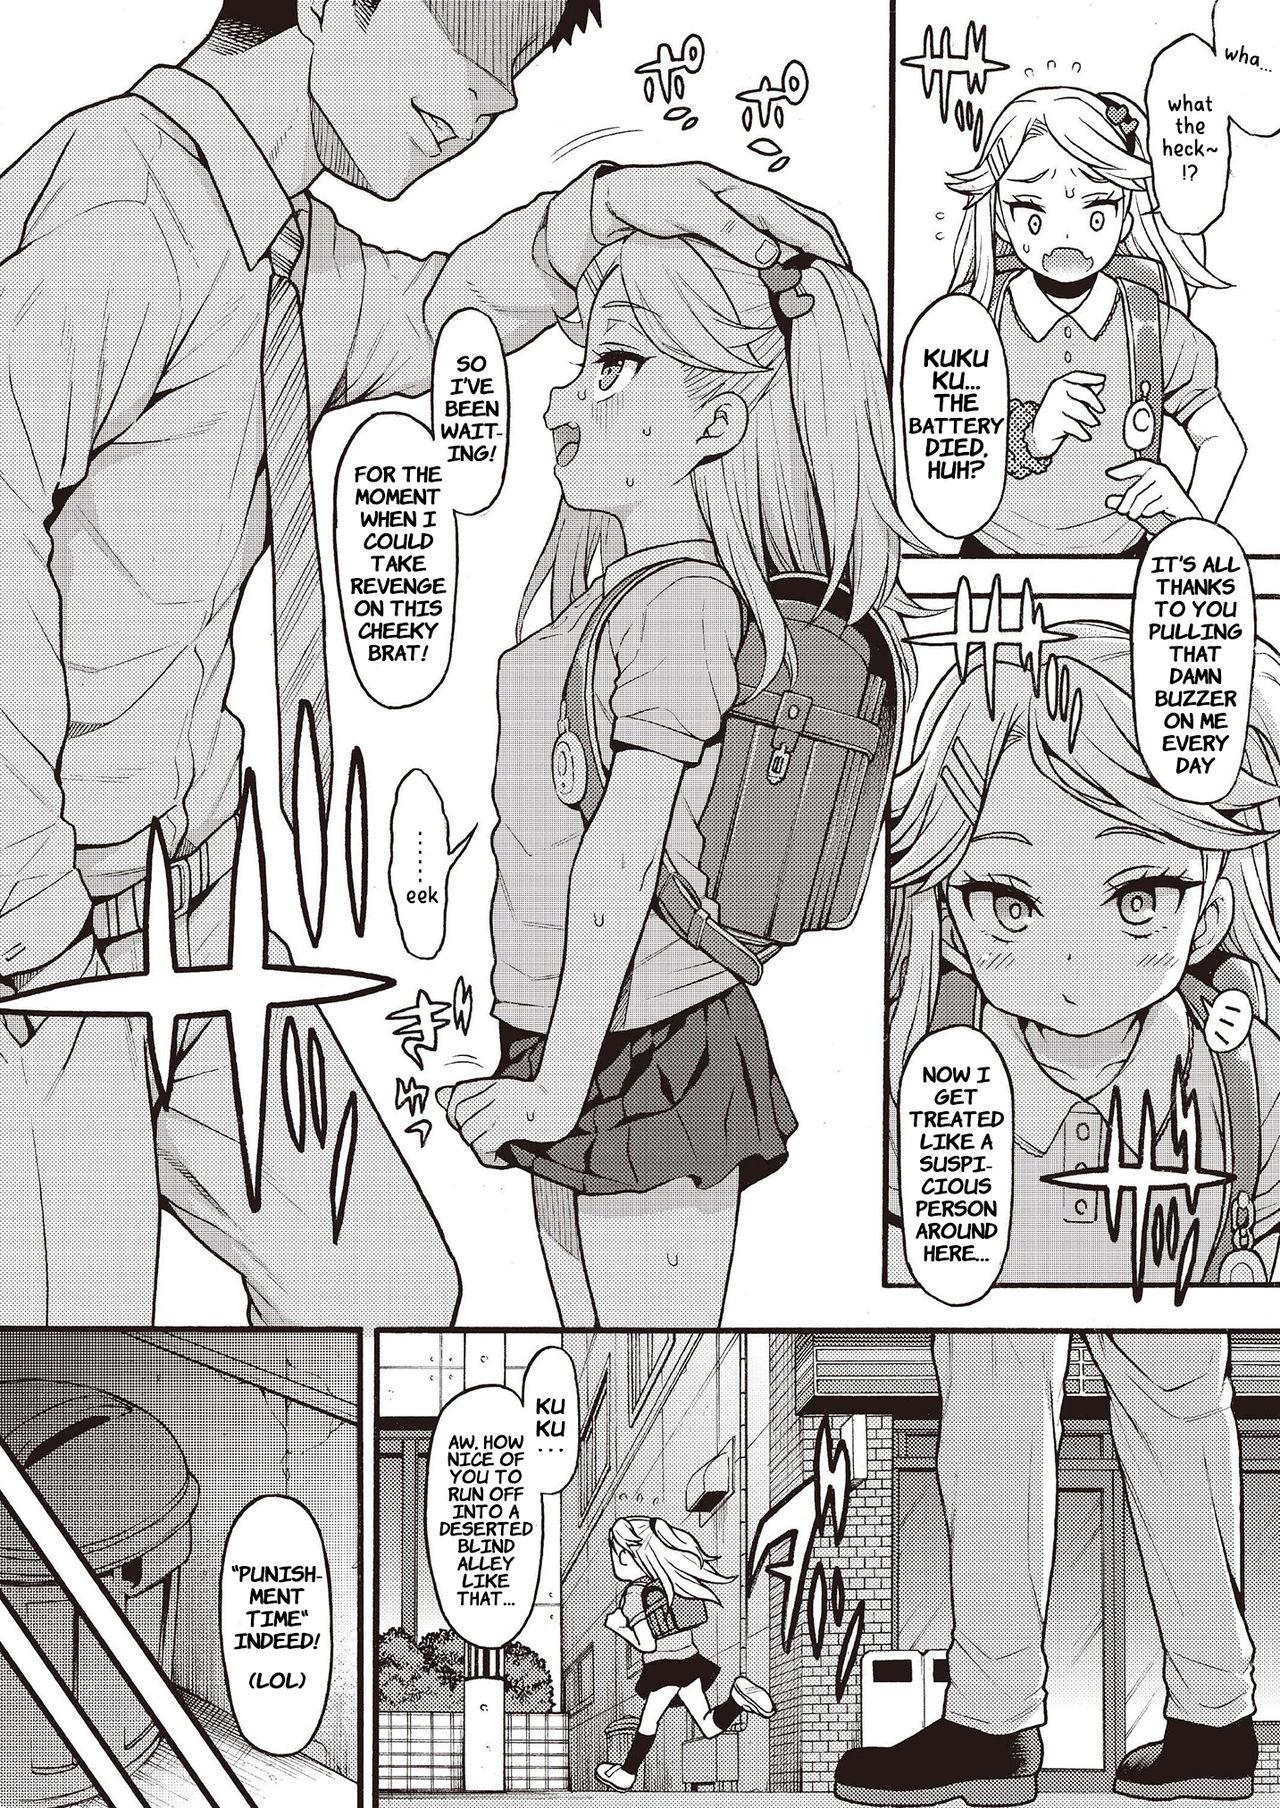 Older Mesugaki Wakarase Goudou | Putting Slutty Brats in Their Place: an Anthology - Original Gay Trimmed - Page 6